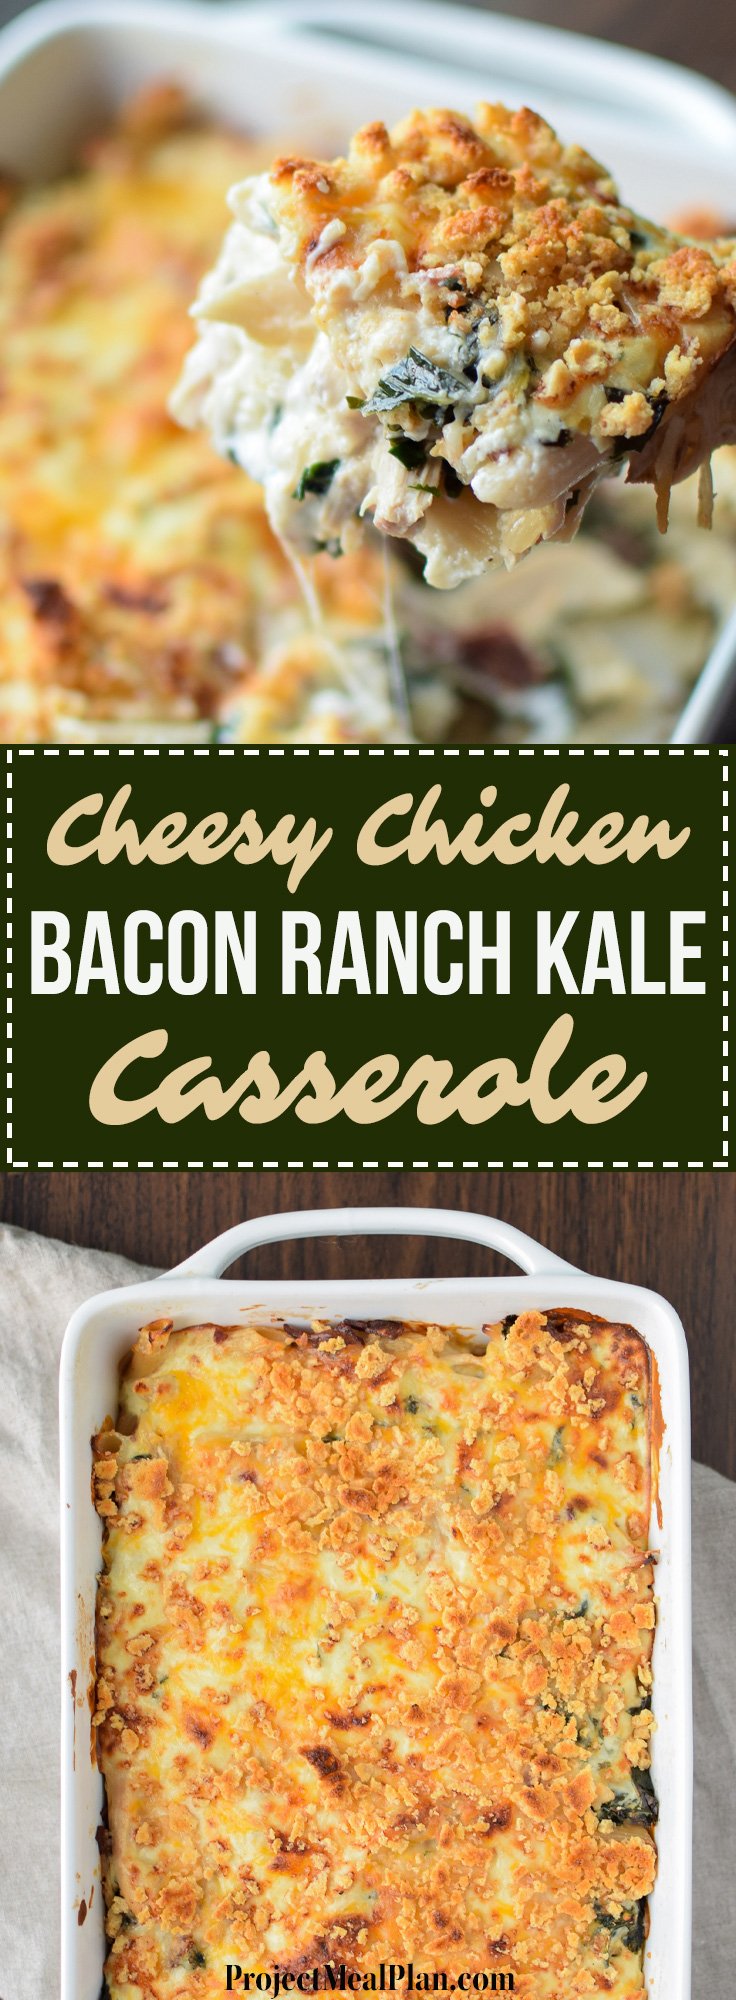 Cheesy Chicken Bacon Ranch Kale Casserole - A healthy and creamy combo of brown rice pasta, kale, chicken, greek yogurt and more! - ProjectMealPlan.com